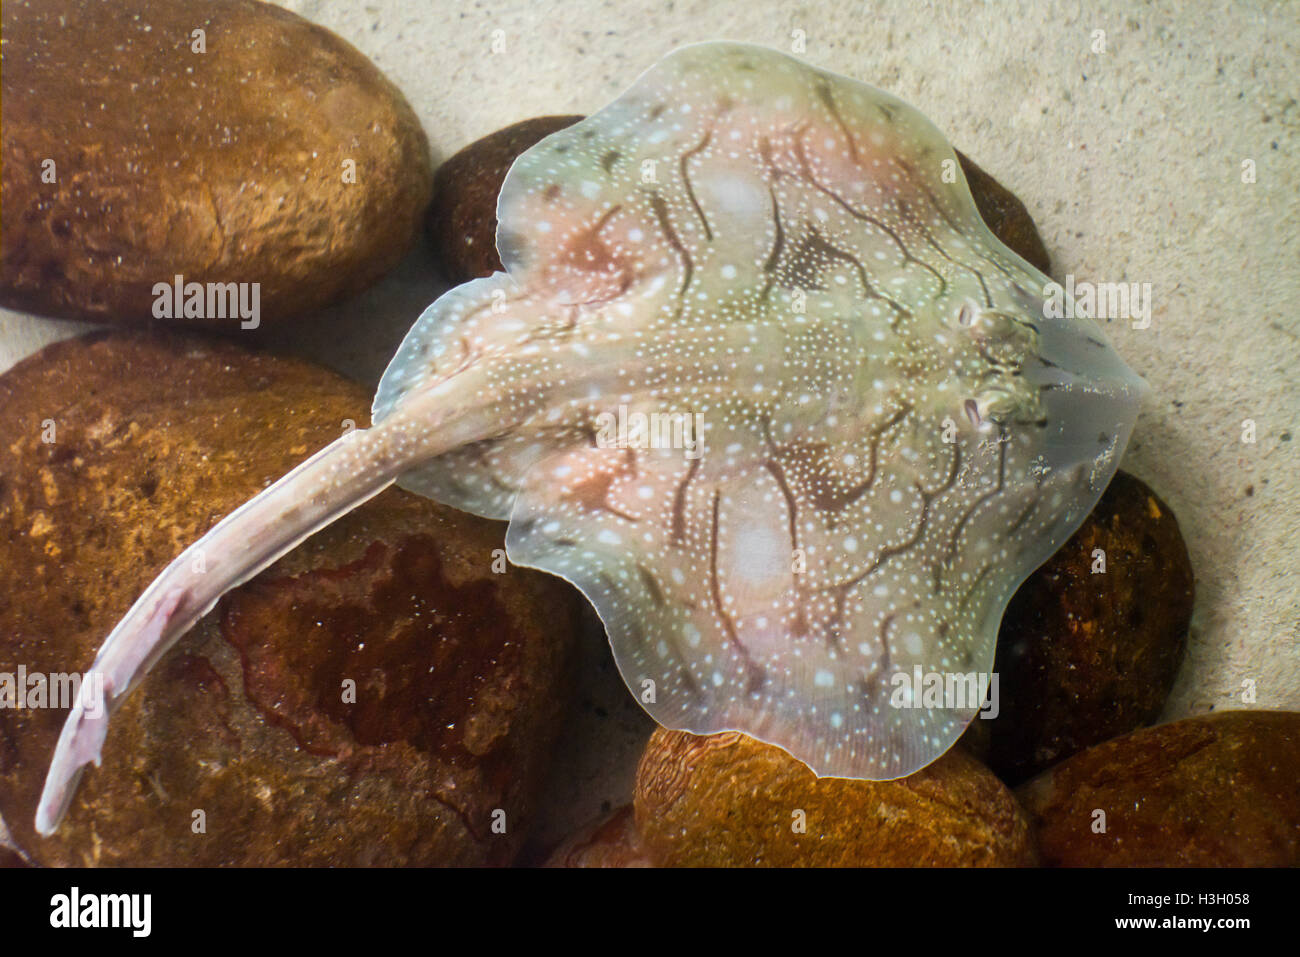 Horizontal close up of a common stingaree in the sea. Stock Photo